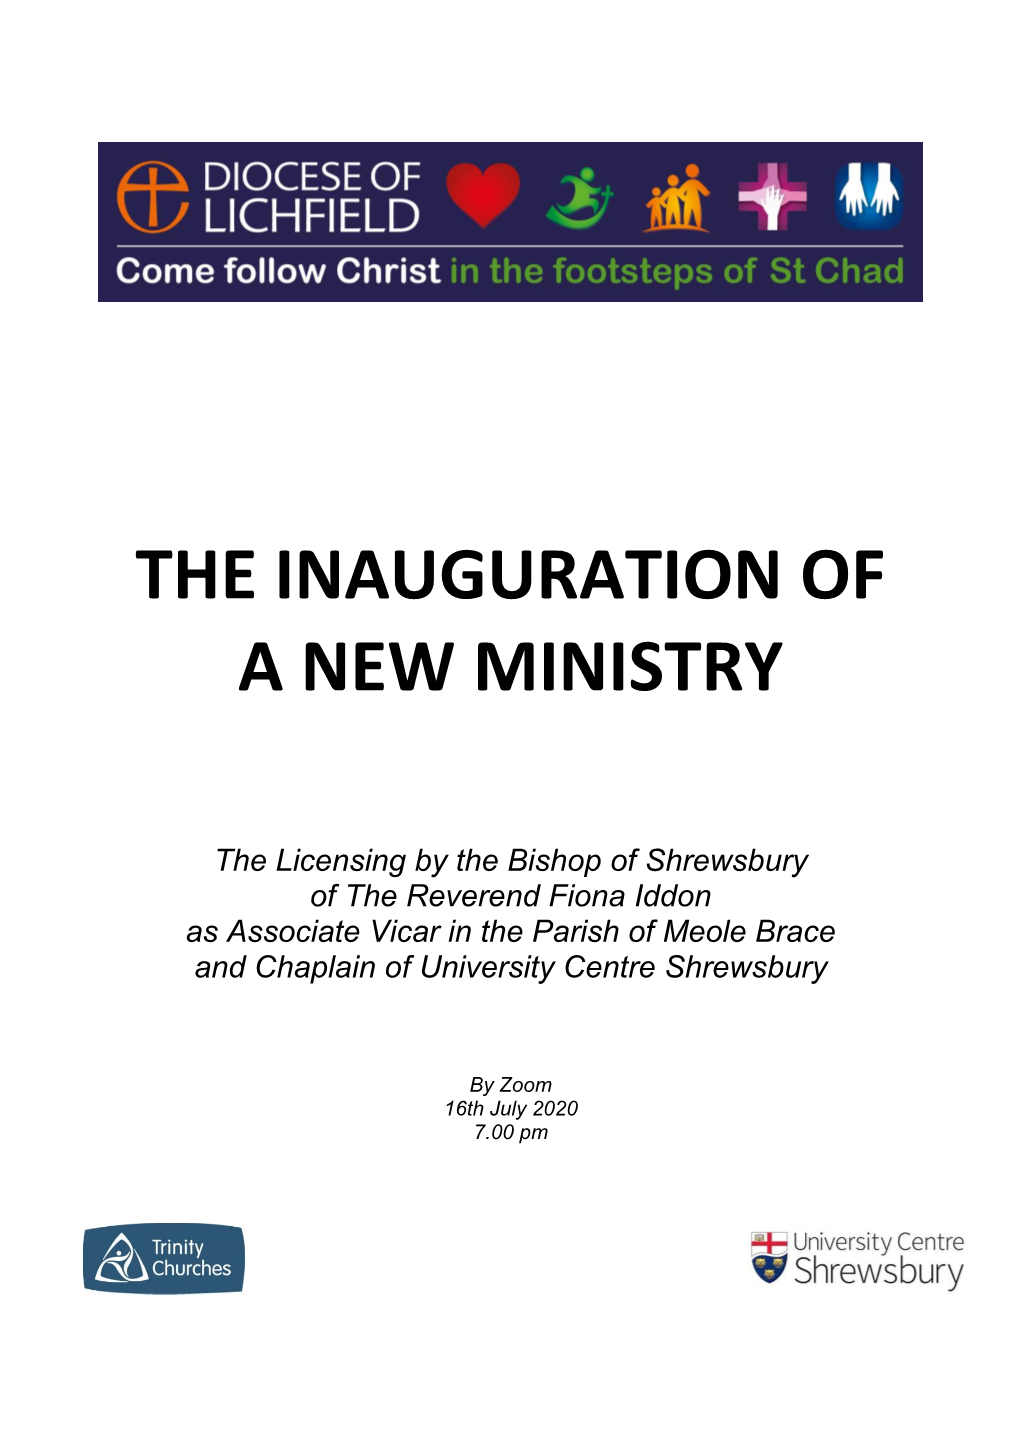 The Inauguration of a New Ministry